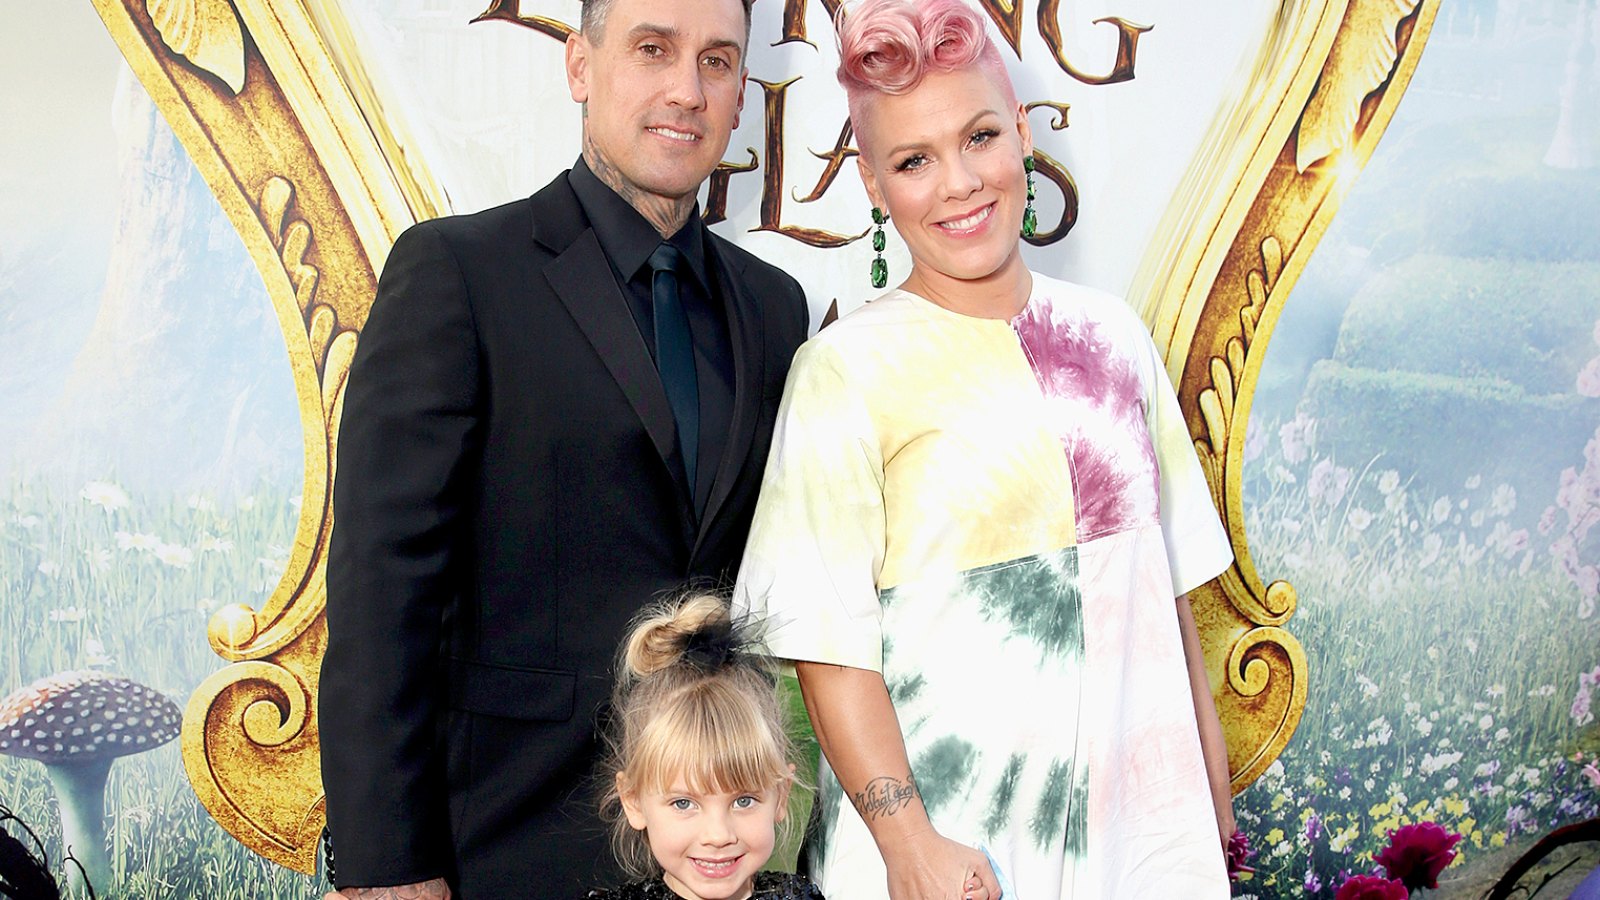 Carey Hart, Willow Sage Hart and singer-songwriter Pink attend the premiere of Disney's "Alice Through The Looking Glass" at the El Capitan Theatre on May 23, 2016.